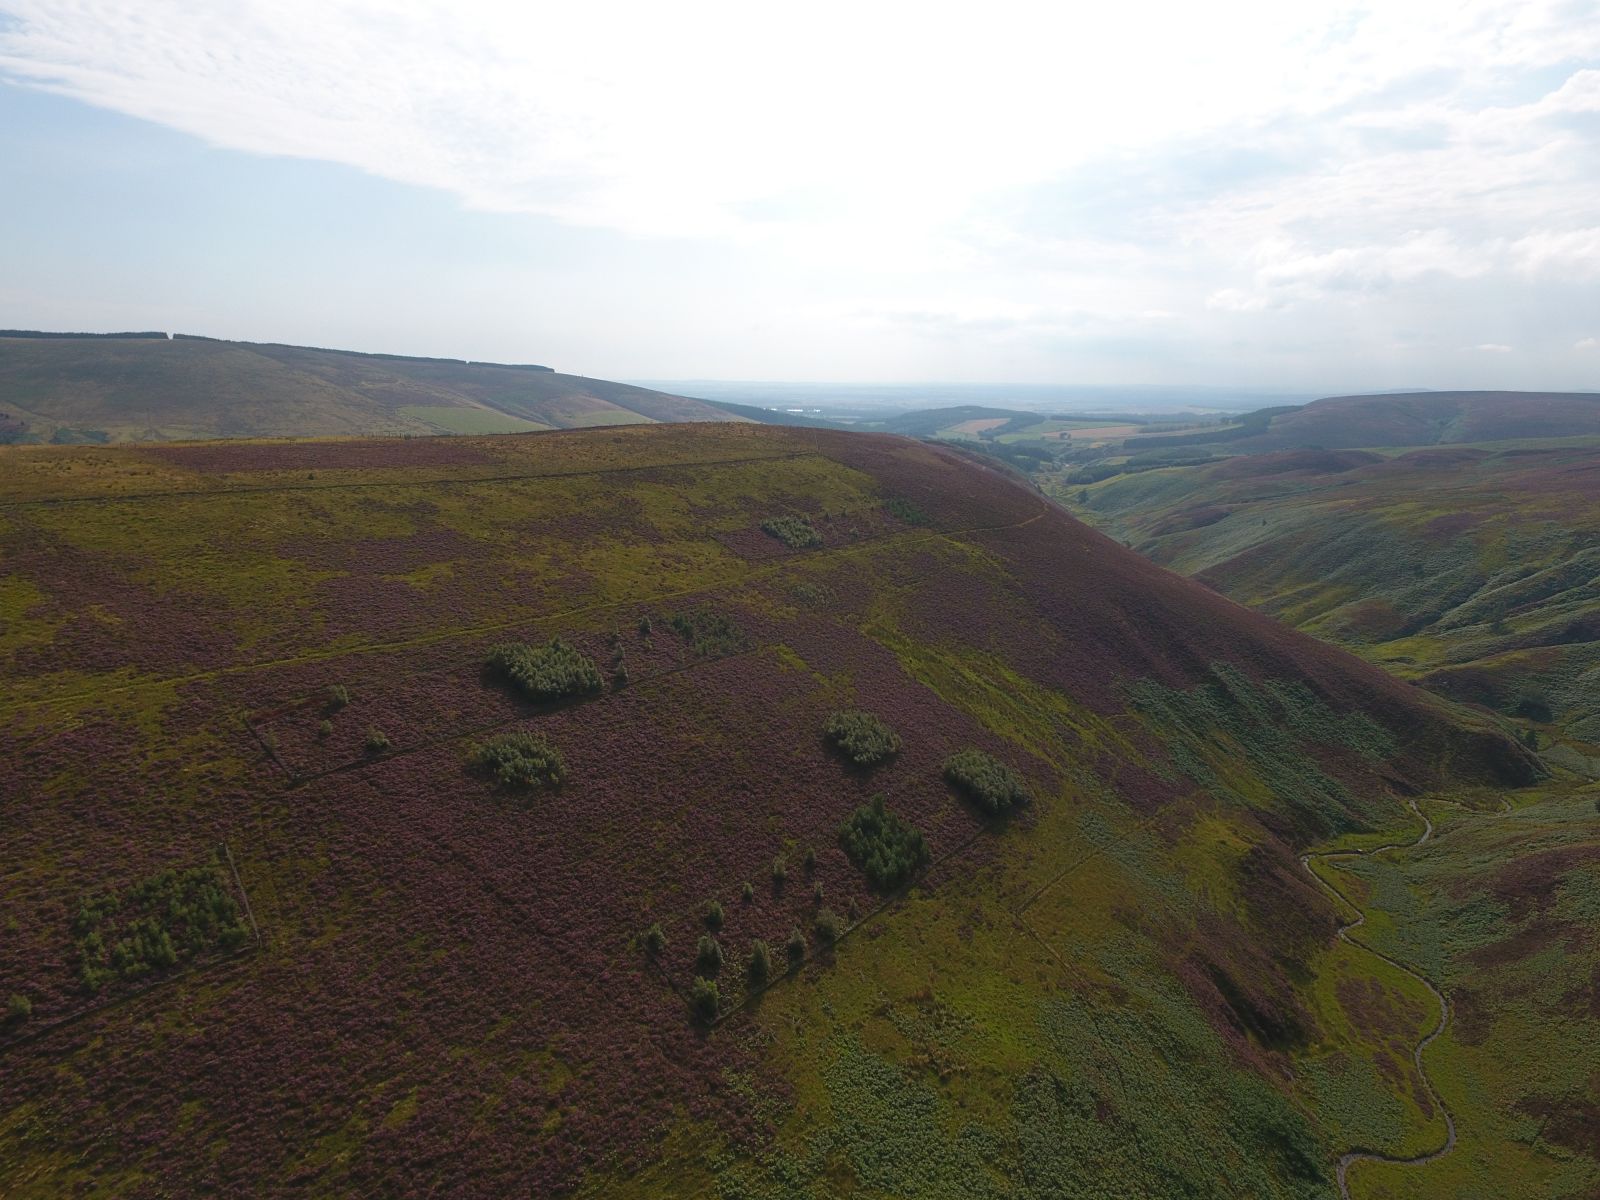  Arial view of experiment plots at Glensaugh.  Photo credit Damian Bienkowski 